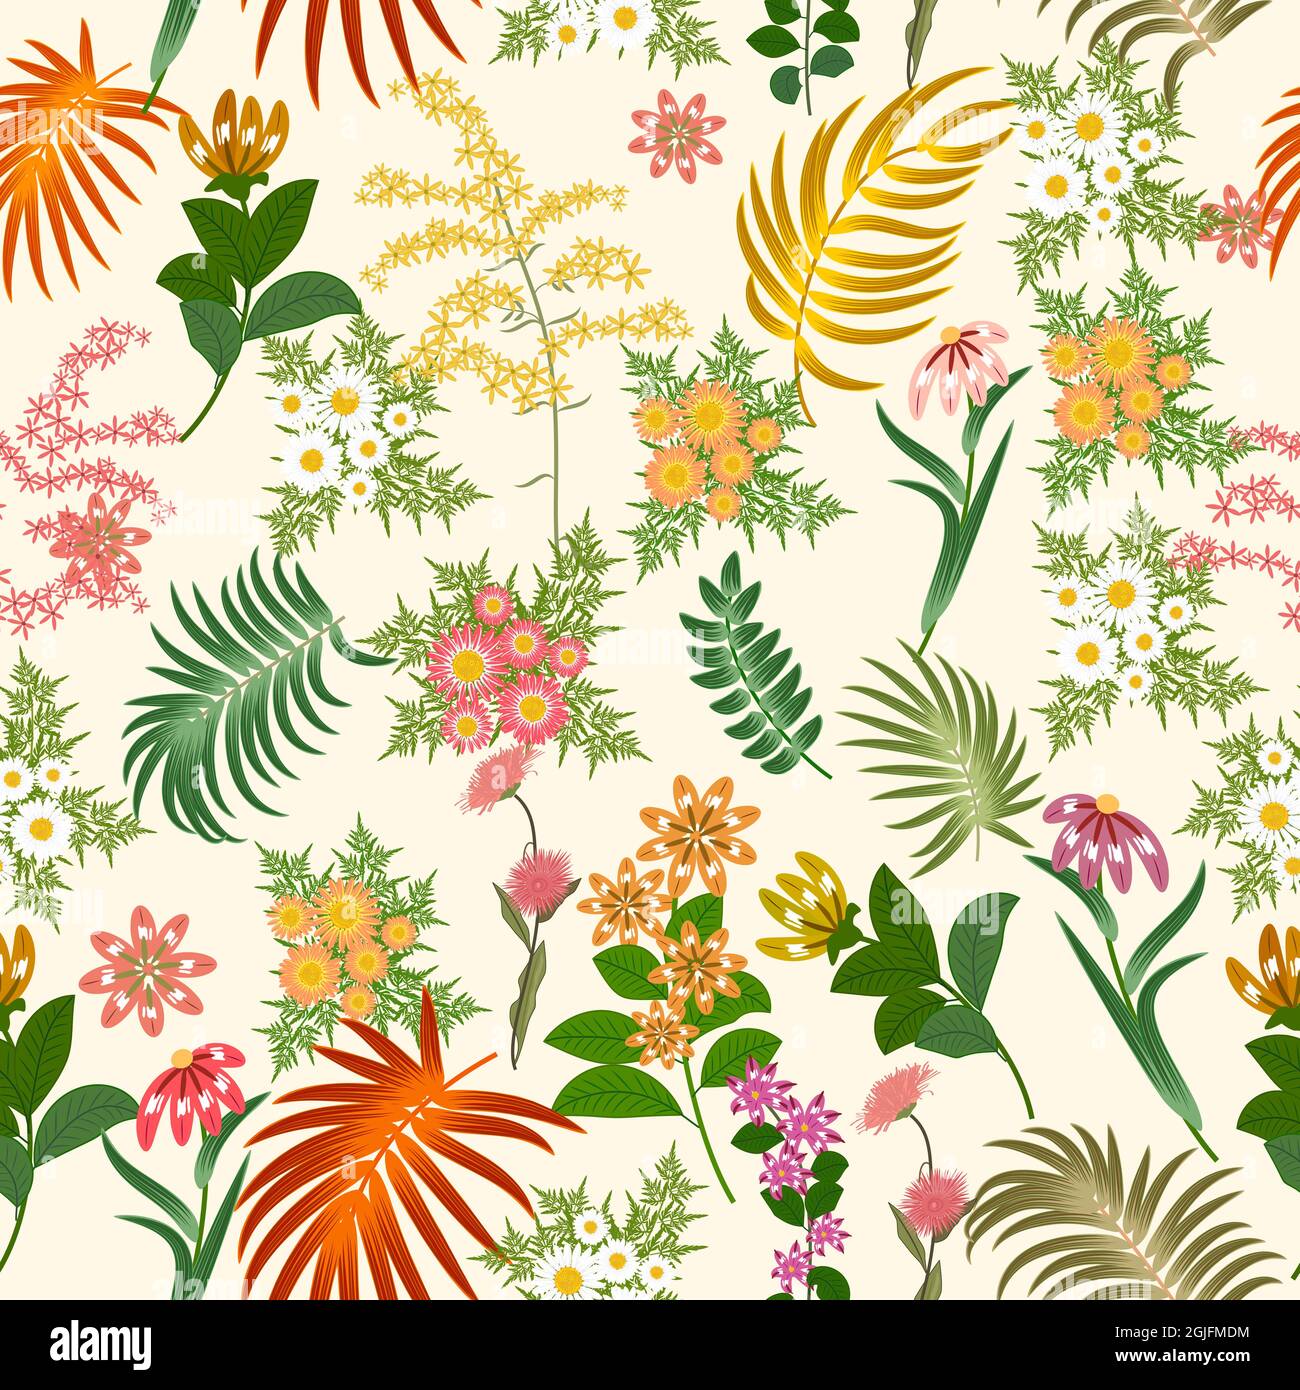 Seamless pattern with bright flowers and tropical leaves of palm tree on light background. Botany vector background, jungle wallpaper. Stock Vector